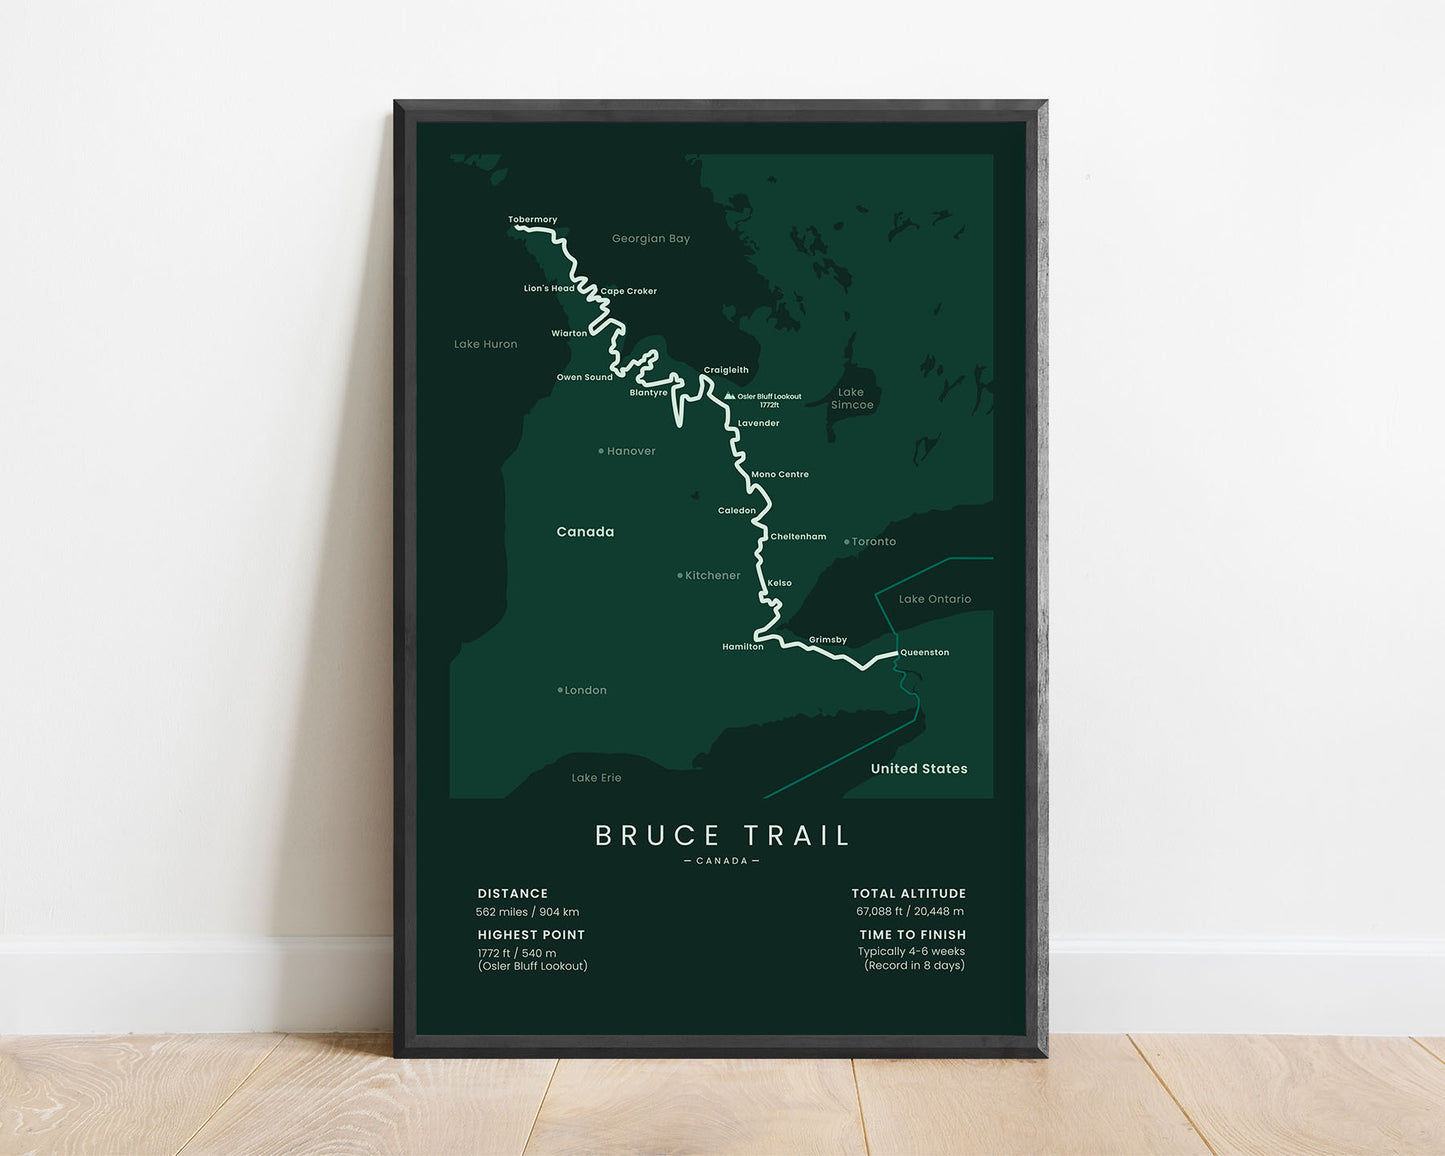 Bruce Trail (Canada) trekking path wall decor with green background